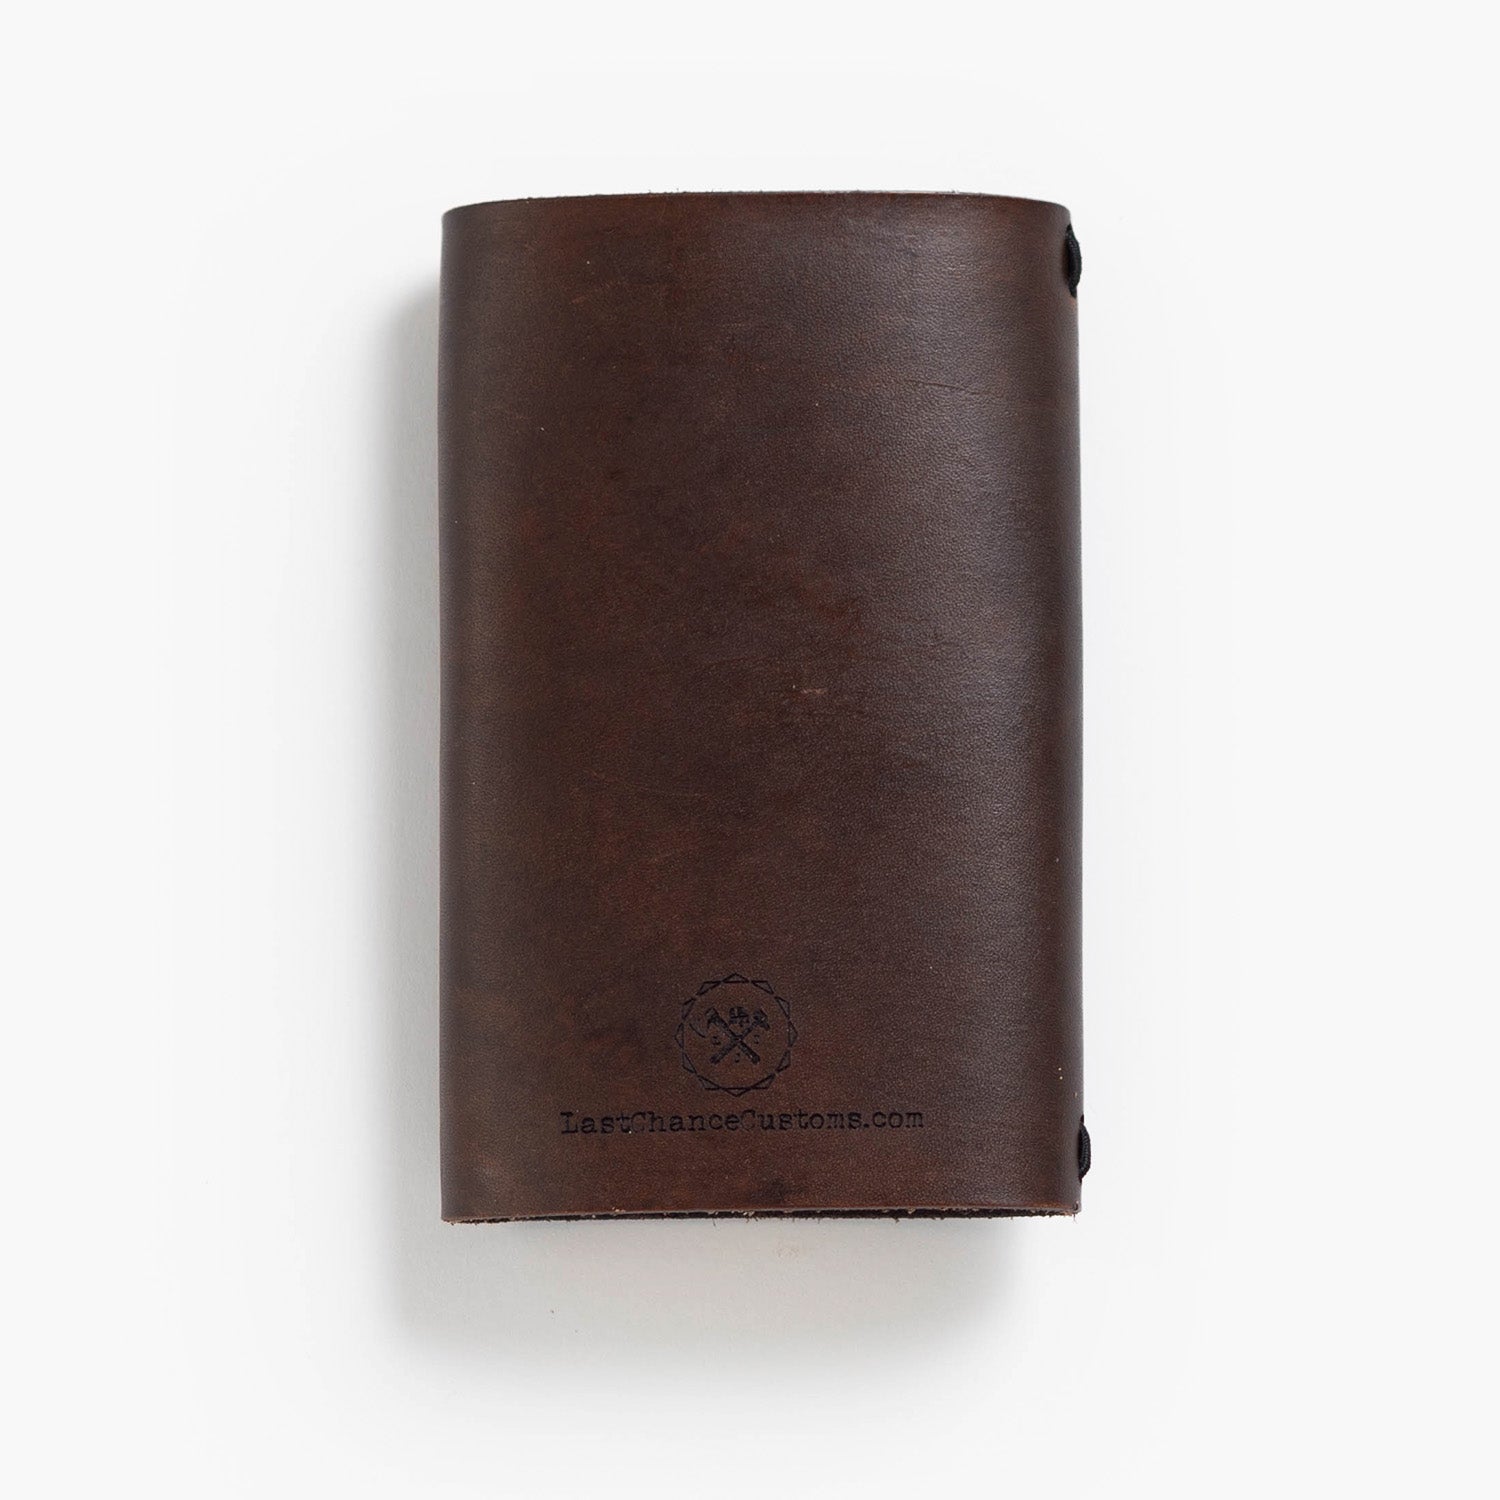 The Distinguished Leather Field Journal | The Catholic Gentleman